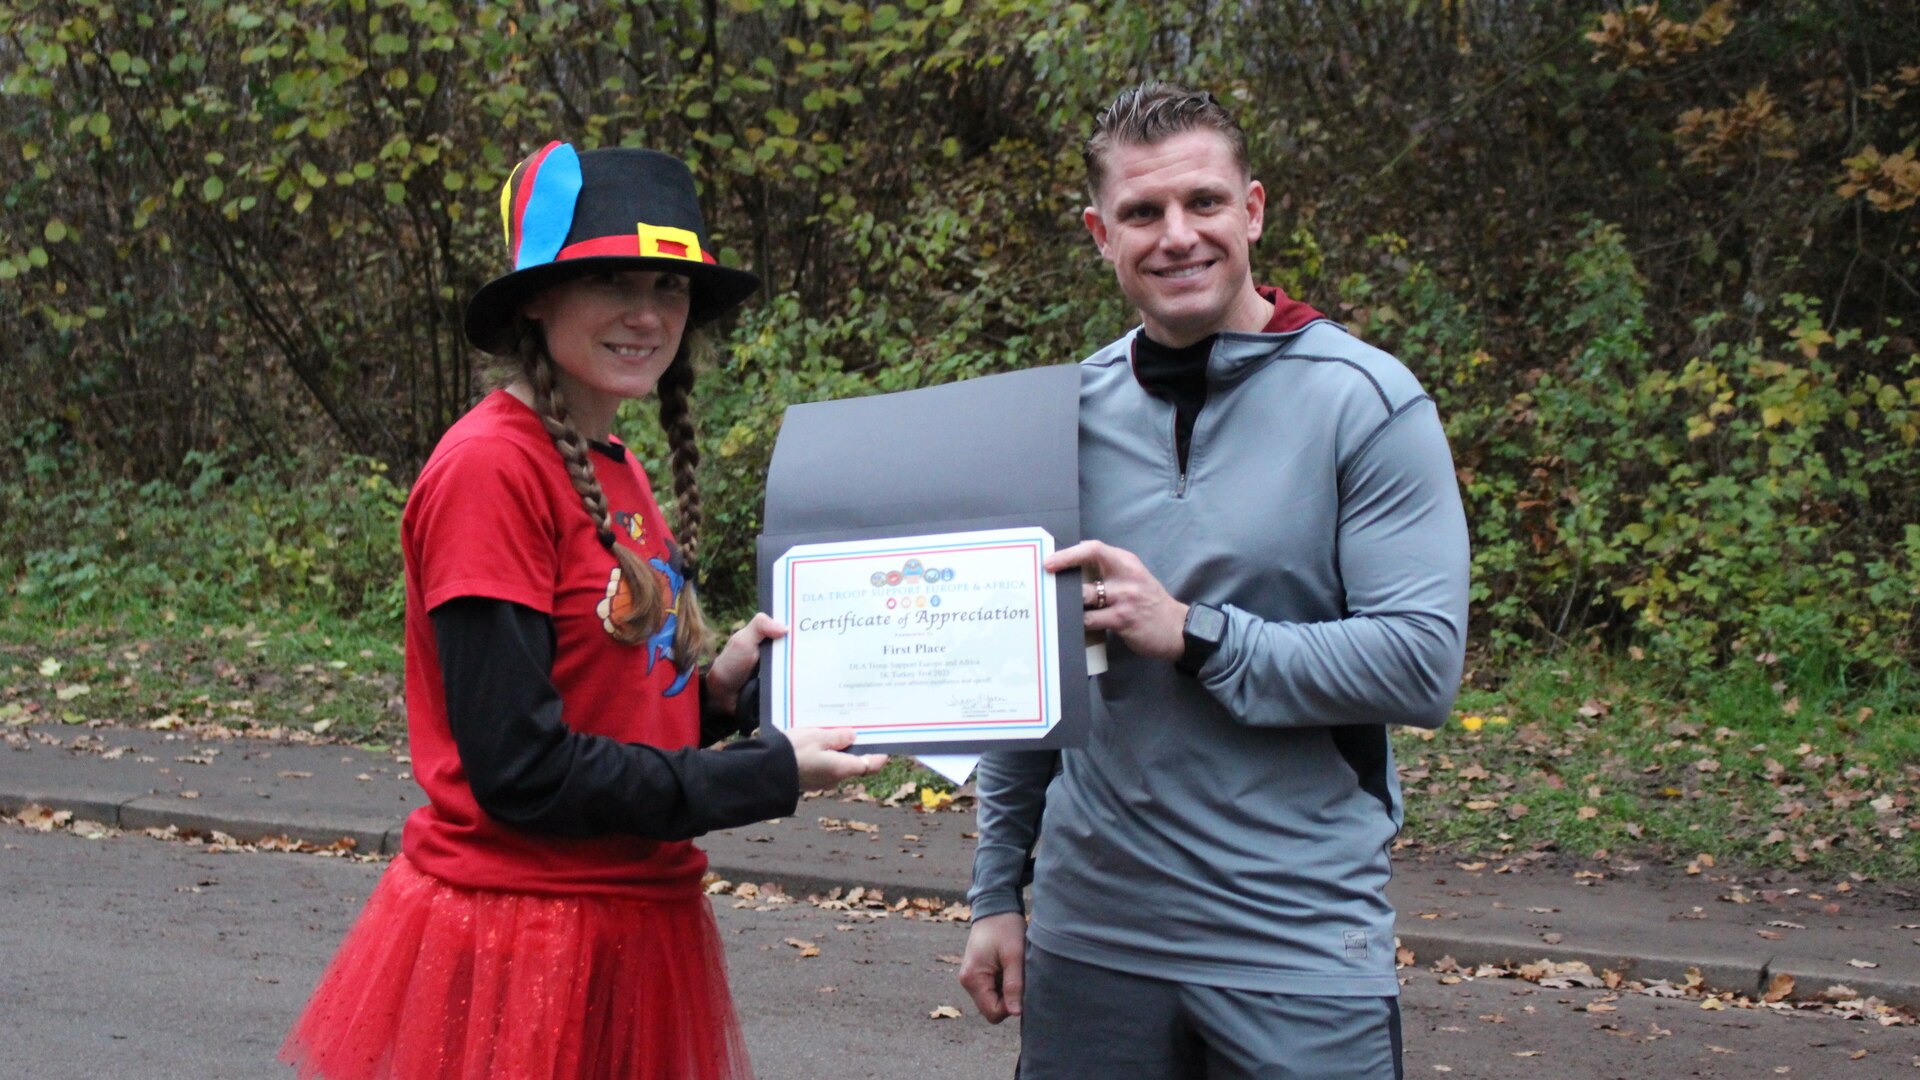 A woman in festive Thanksgiving run attire presents a certificate to a man in gray running gear.